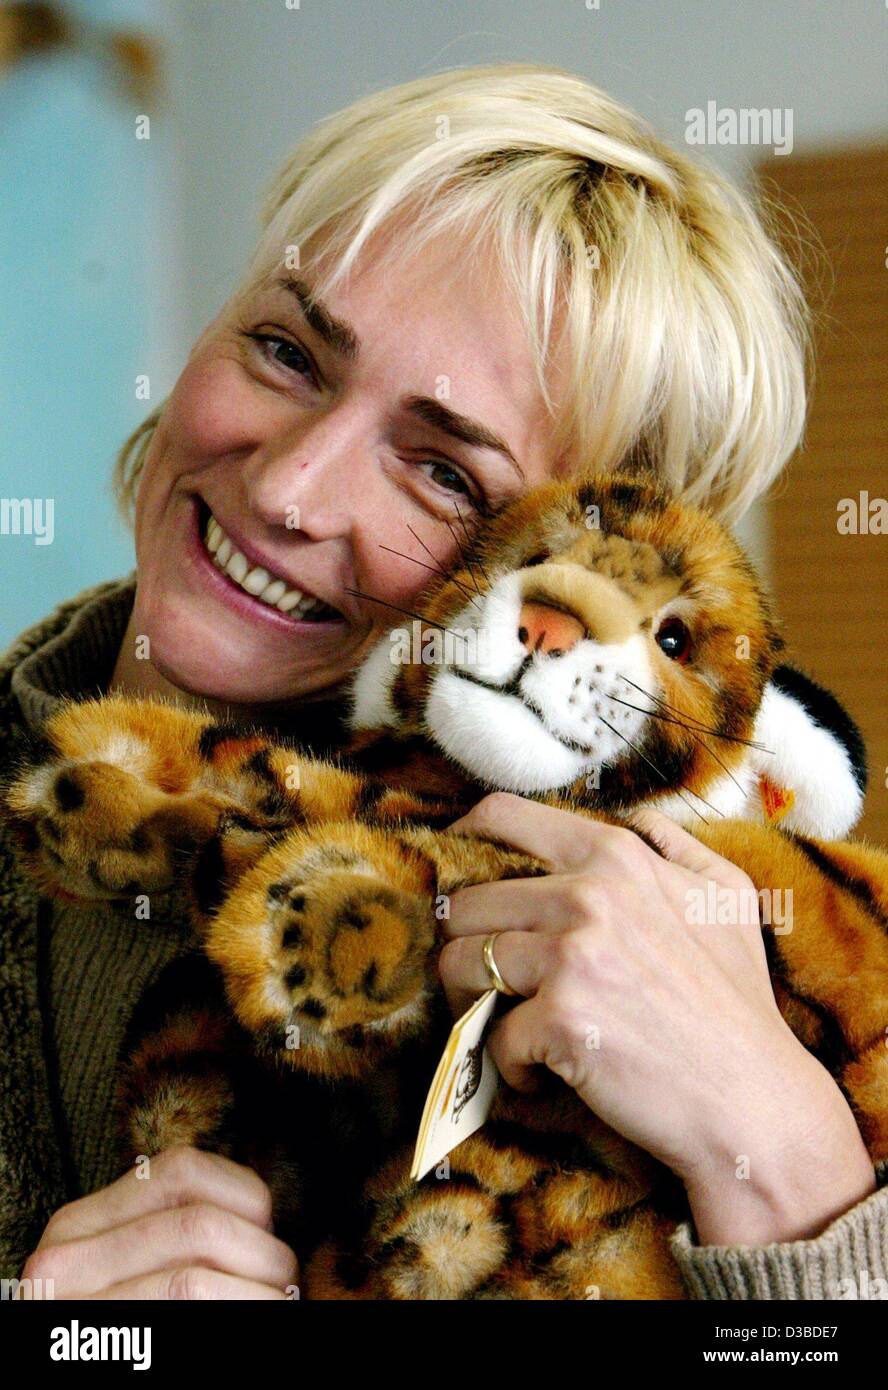 (dpa) - German athlete Heike Drechsler poses with her mascot during a press conference in Karlsruhe, Germany, 9 January 2003. The 38-year-old won the Olympic Games in 1992 and 2000, the World Championships in 1983 and 1993, the European Championships in 1986, 1990, 1994 and 1998 and holds five world Stock Photo